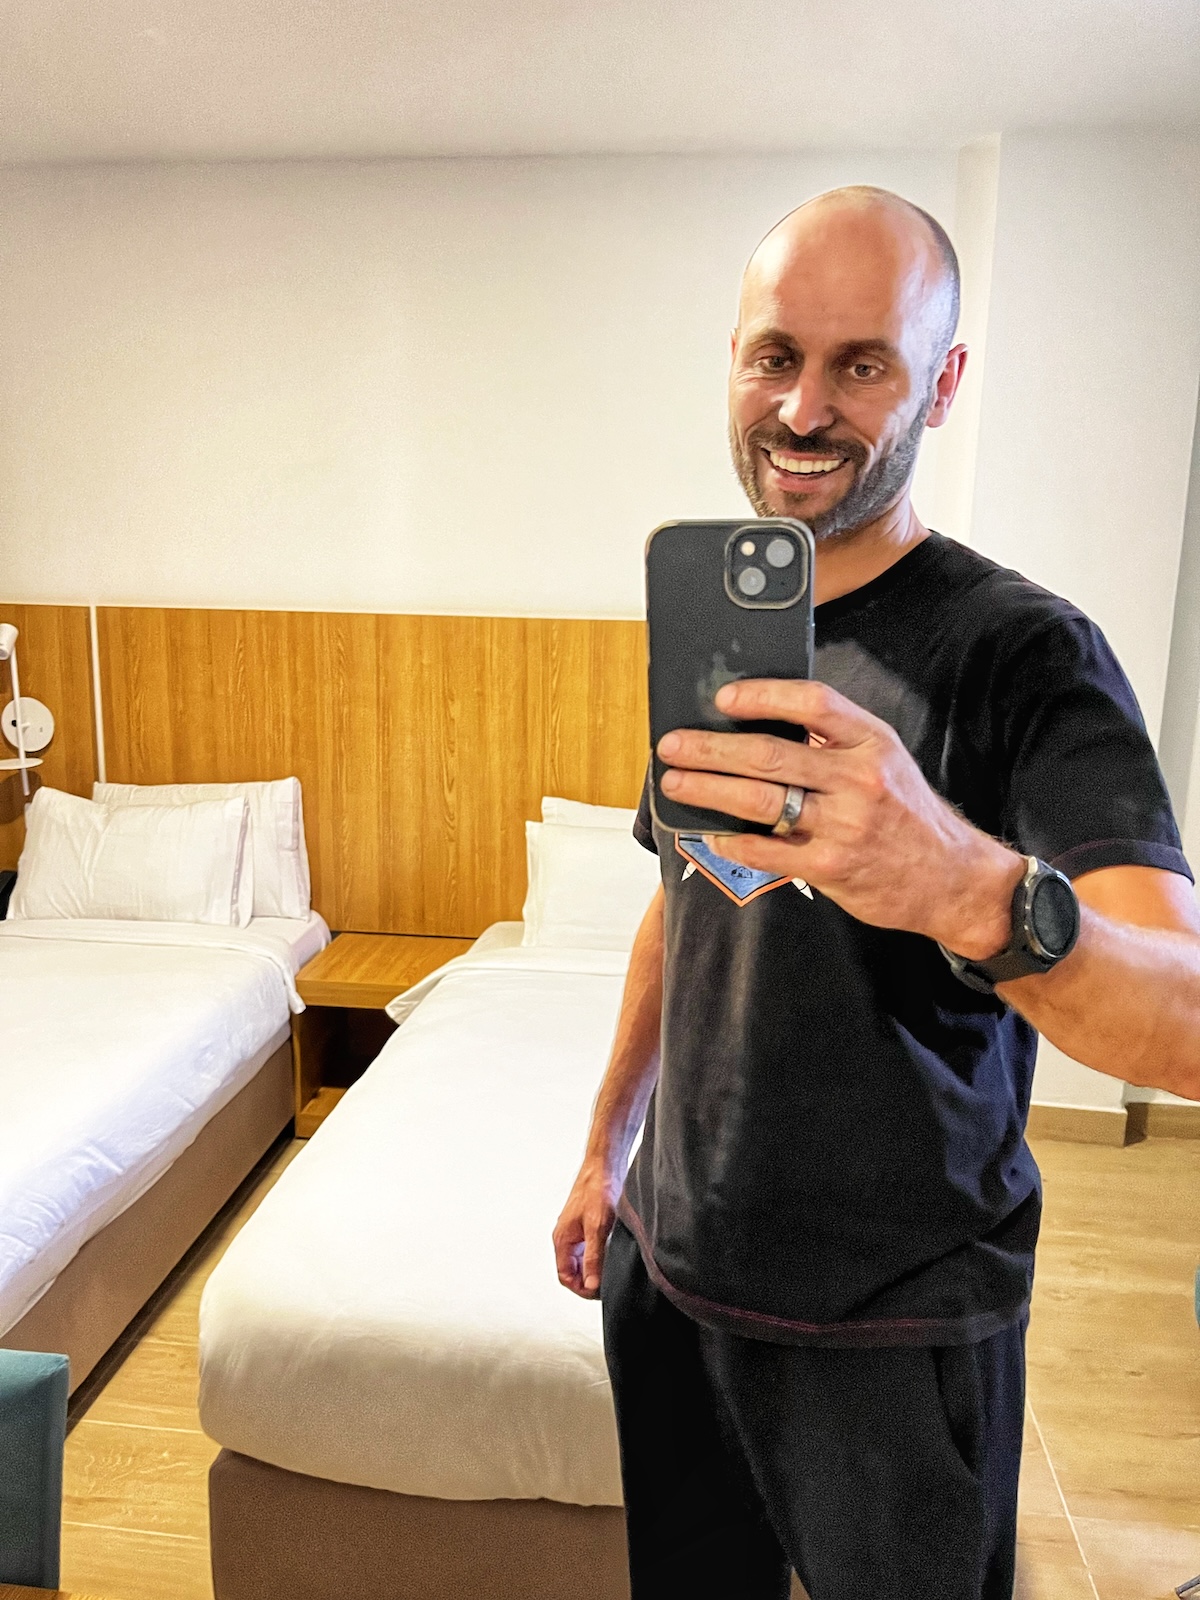 Man poses with dirty face in hotel room